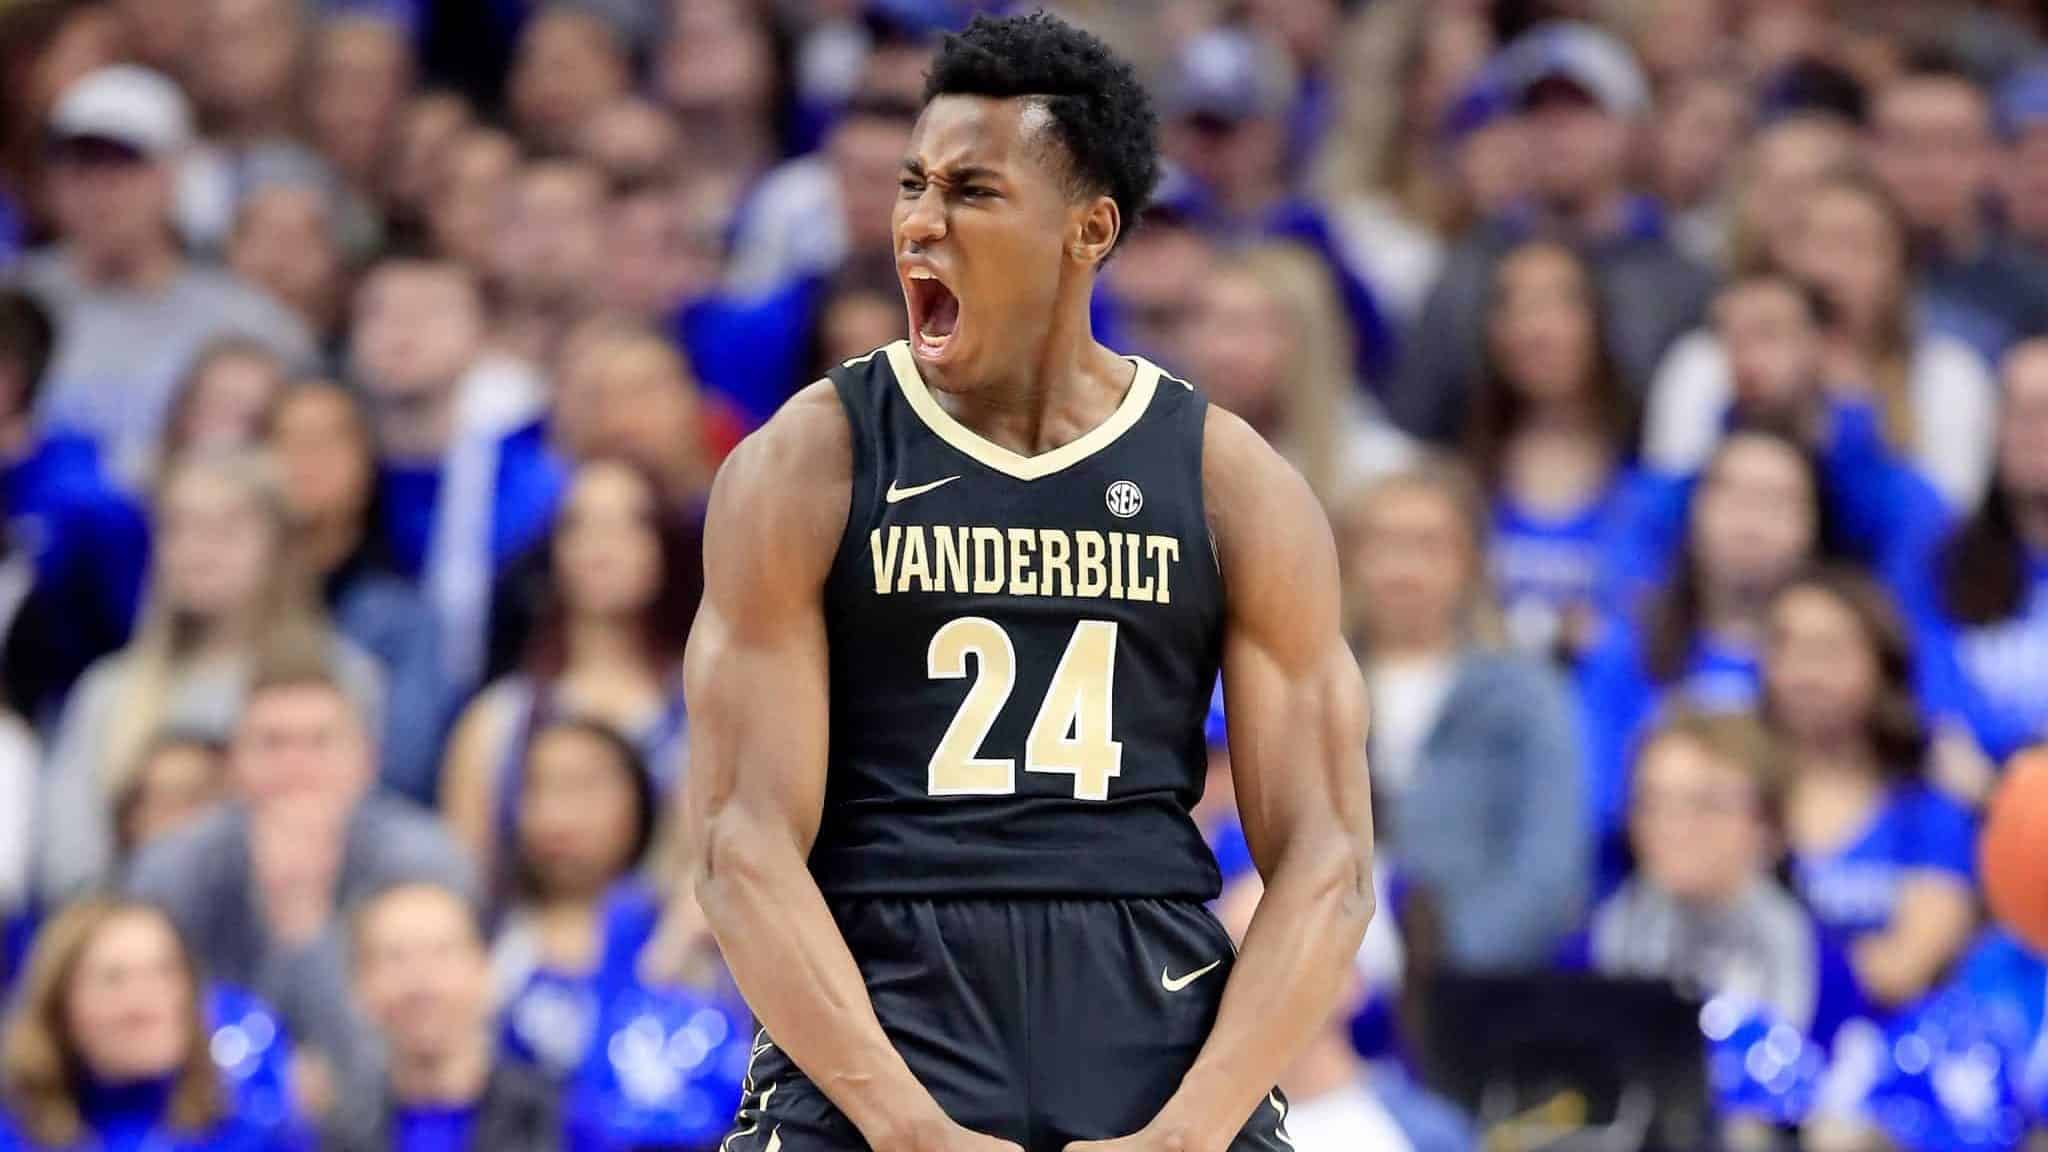 LEXINGTON, KY - JANUARY 12: Aaron Nesmith #24 of the Vanderbilt Commodores celebrates in the game against the Kentucky Wildcats at Rupp Arena on January 12, 2019 in Lexington, Kentucky.